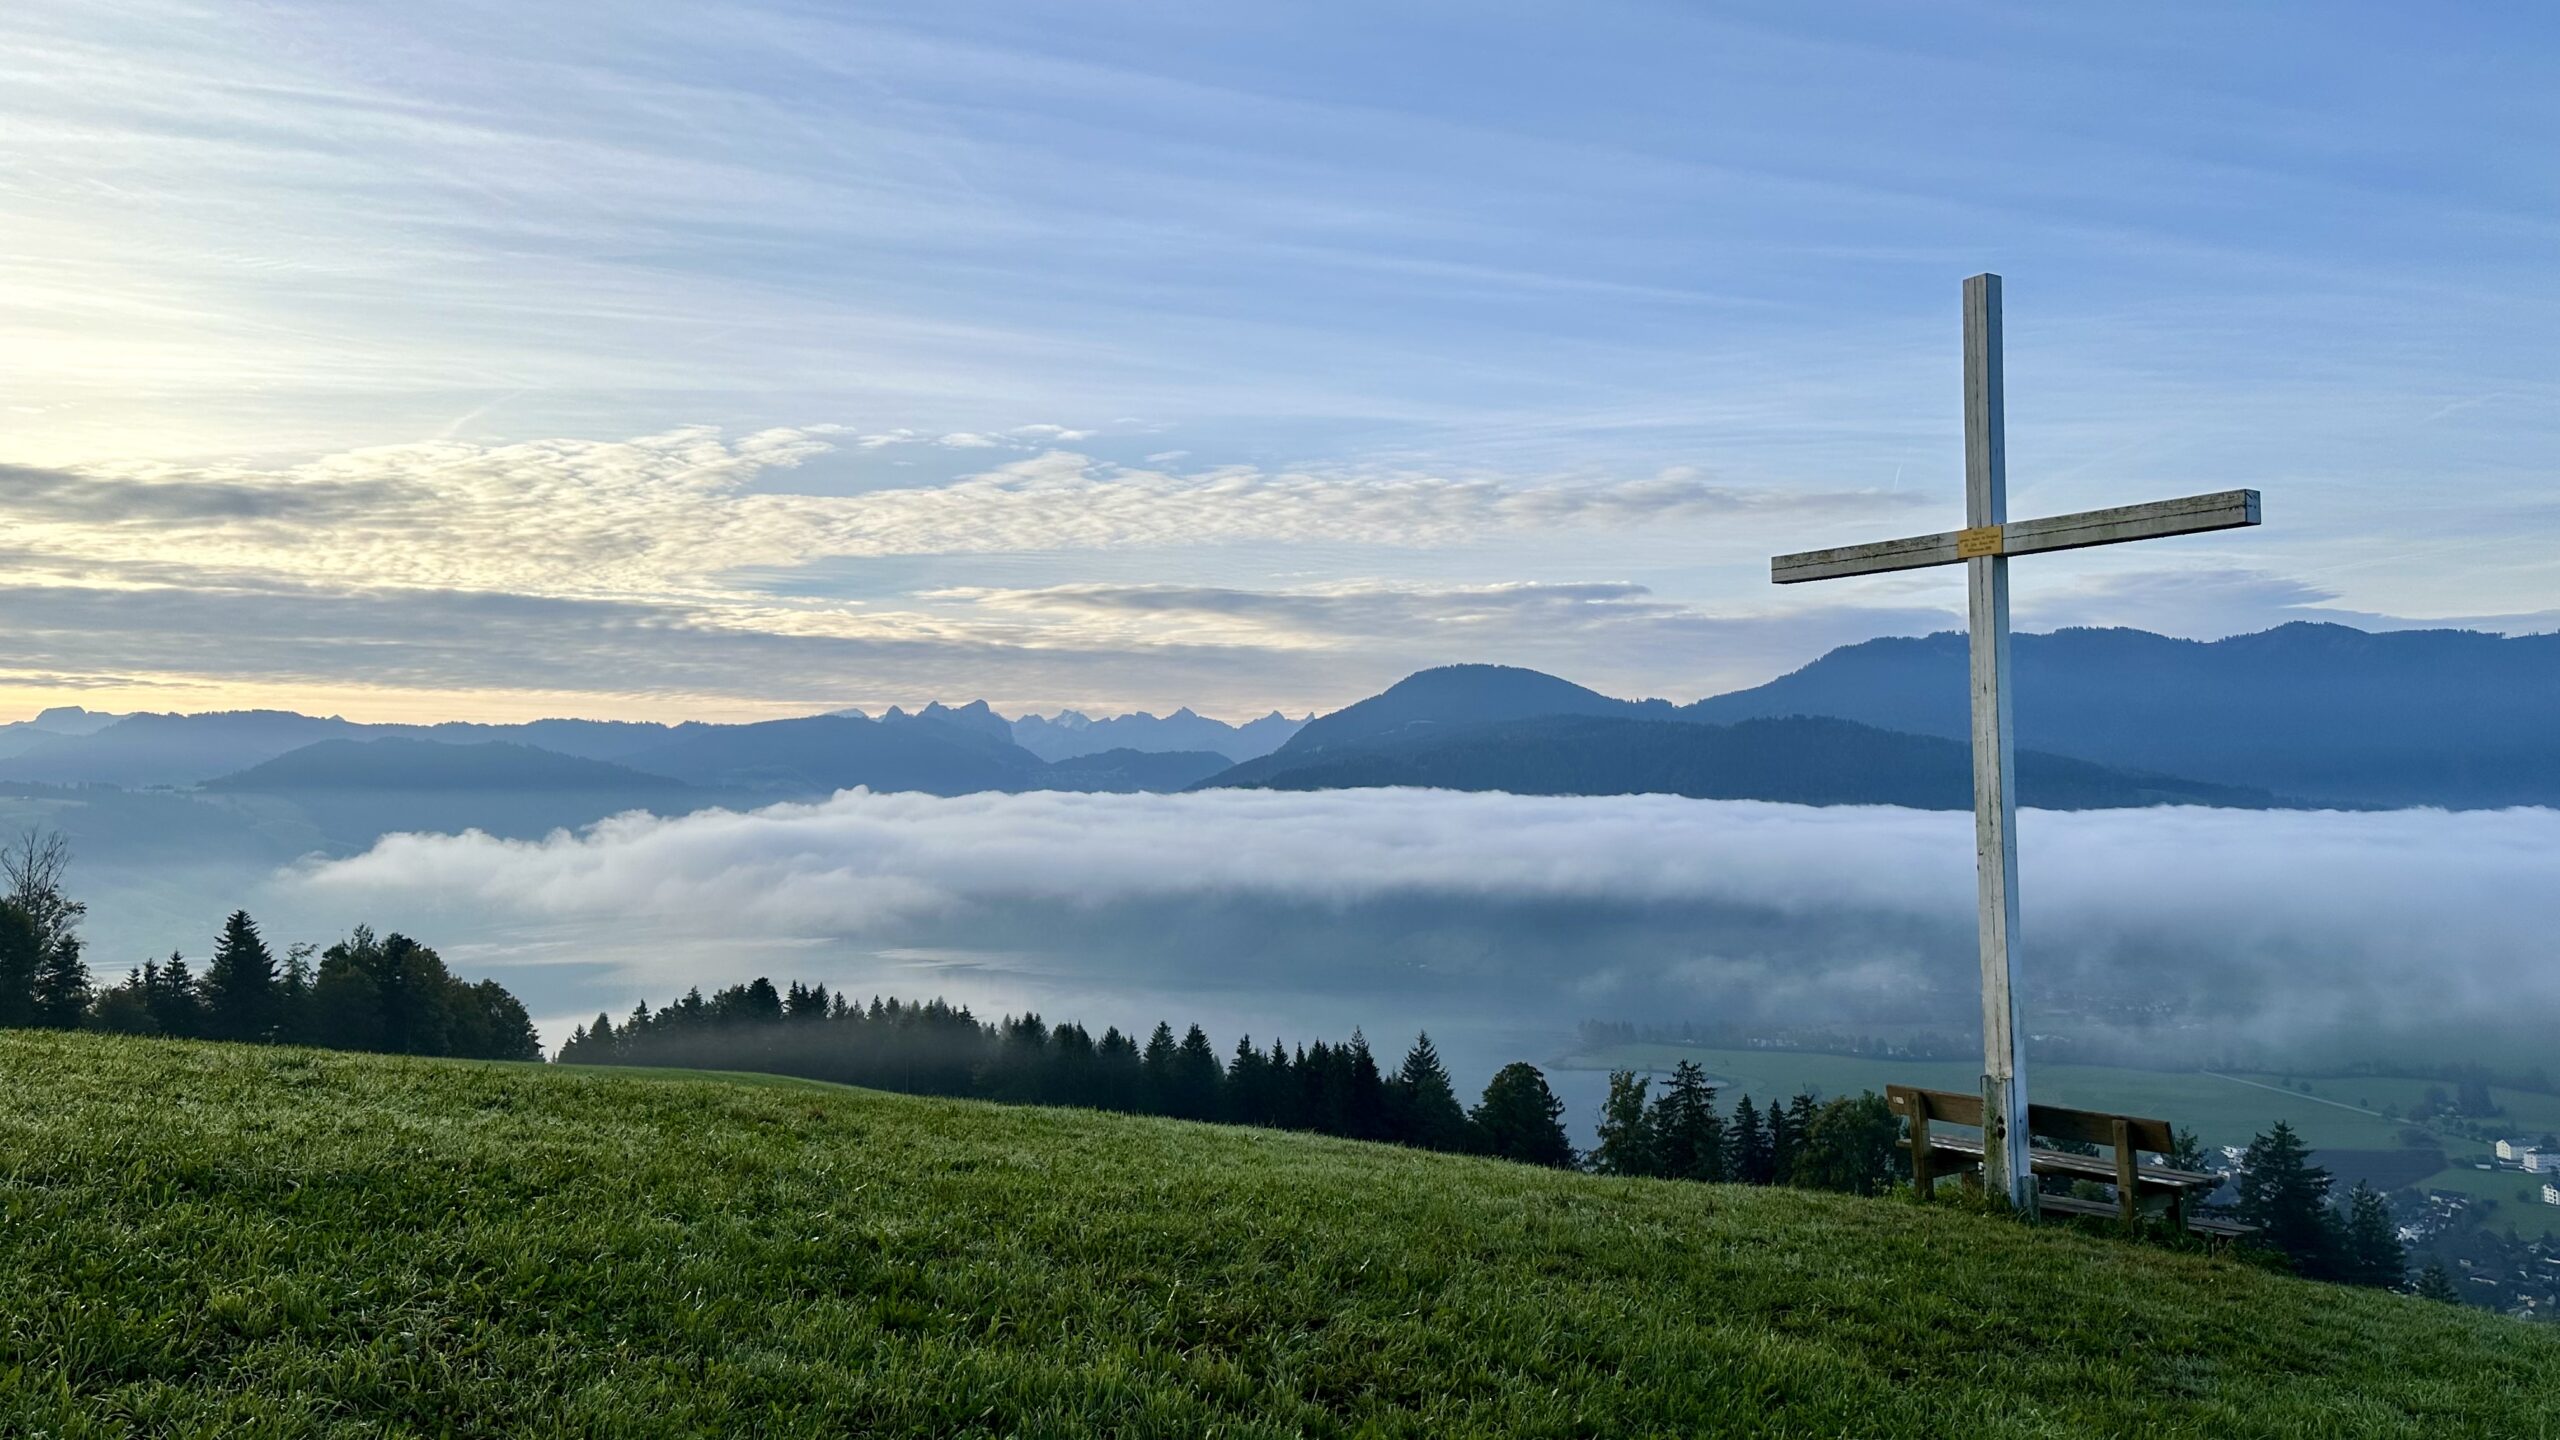 View of a cloud-filled valley with a lake. A large white cross loom over a park bench in the foreground on the right. Mountains line the horizon.